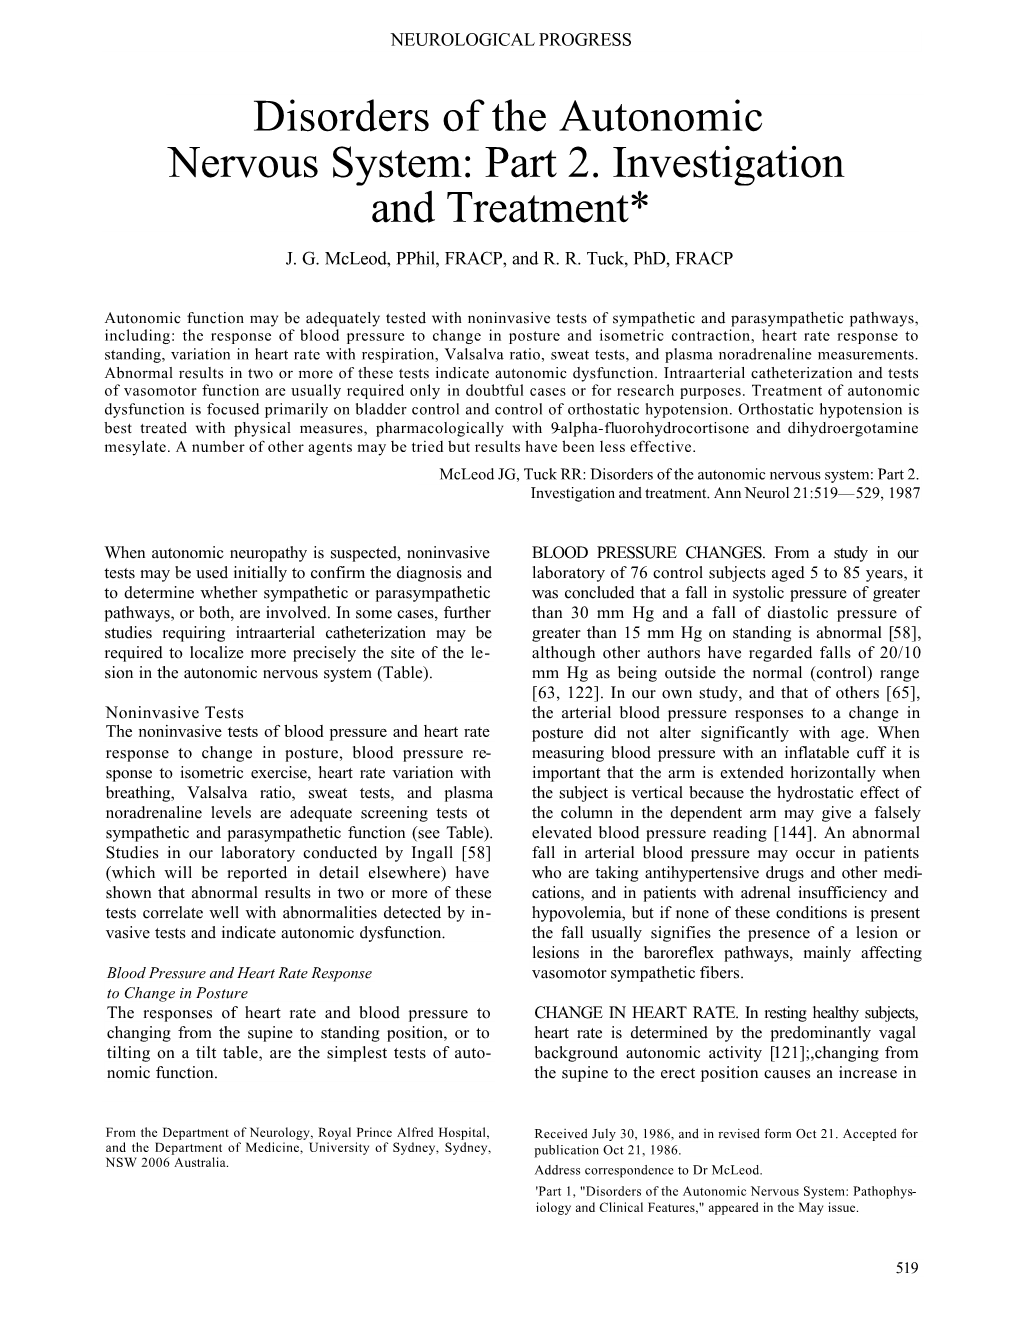 Disorders of the Autonomic Nervous System: Part 2. Investigation and Treatment